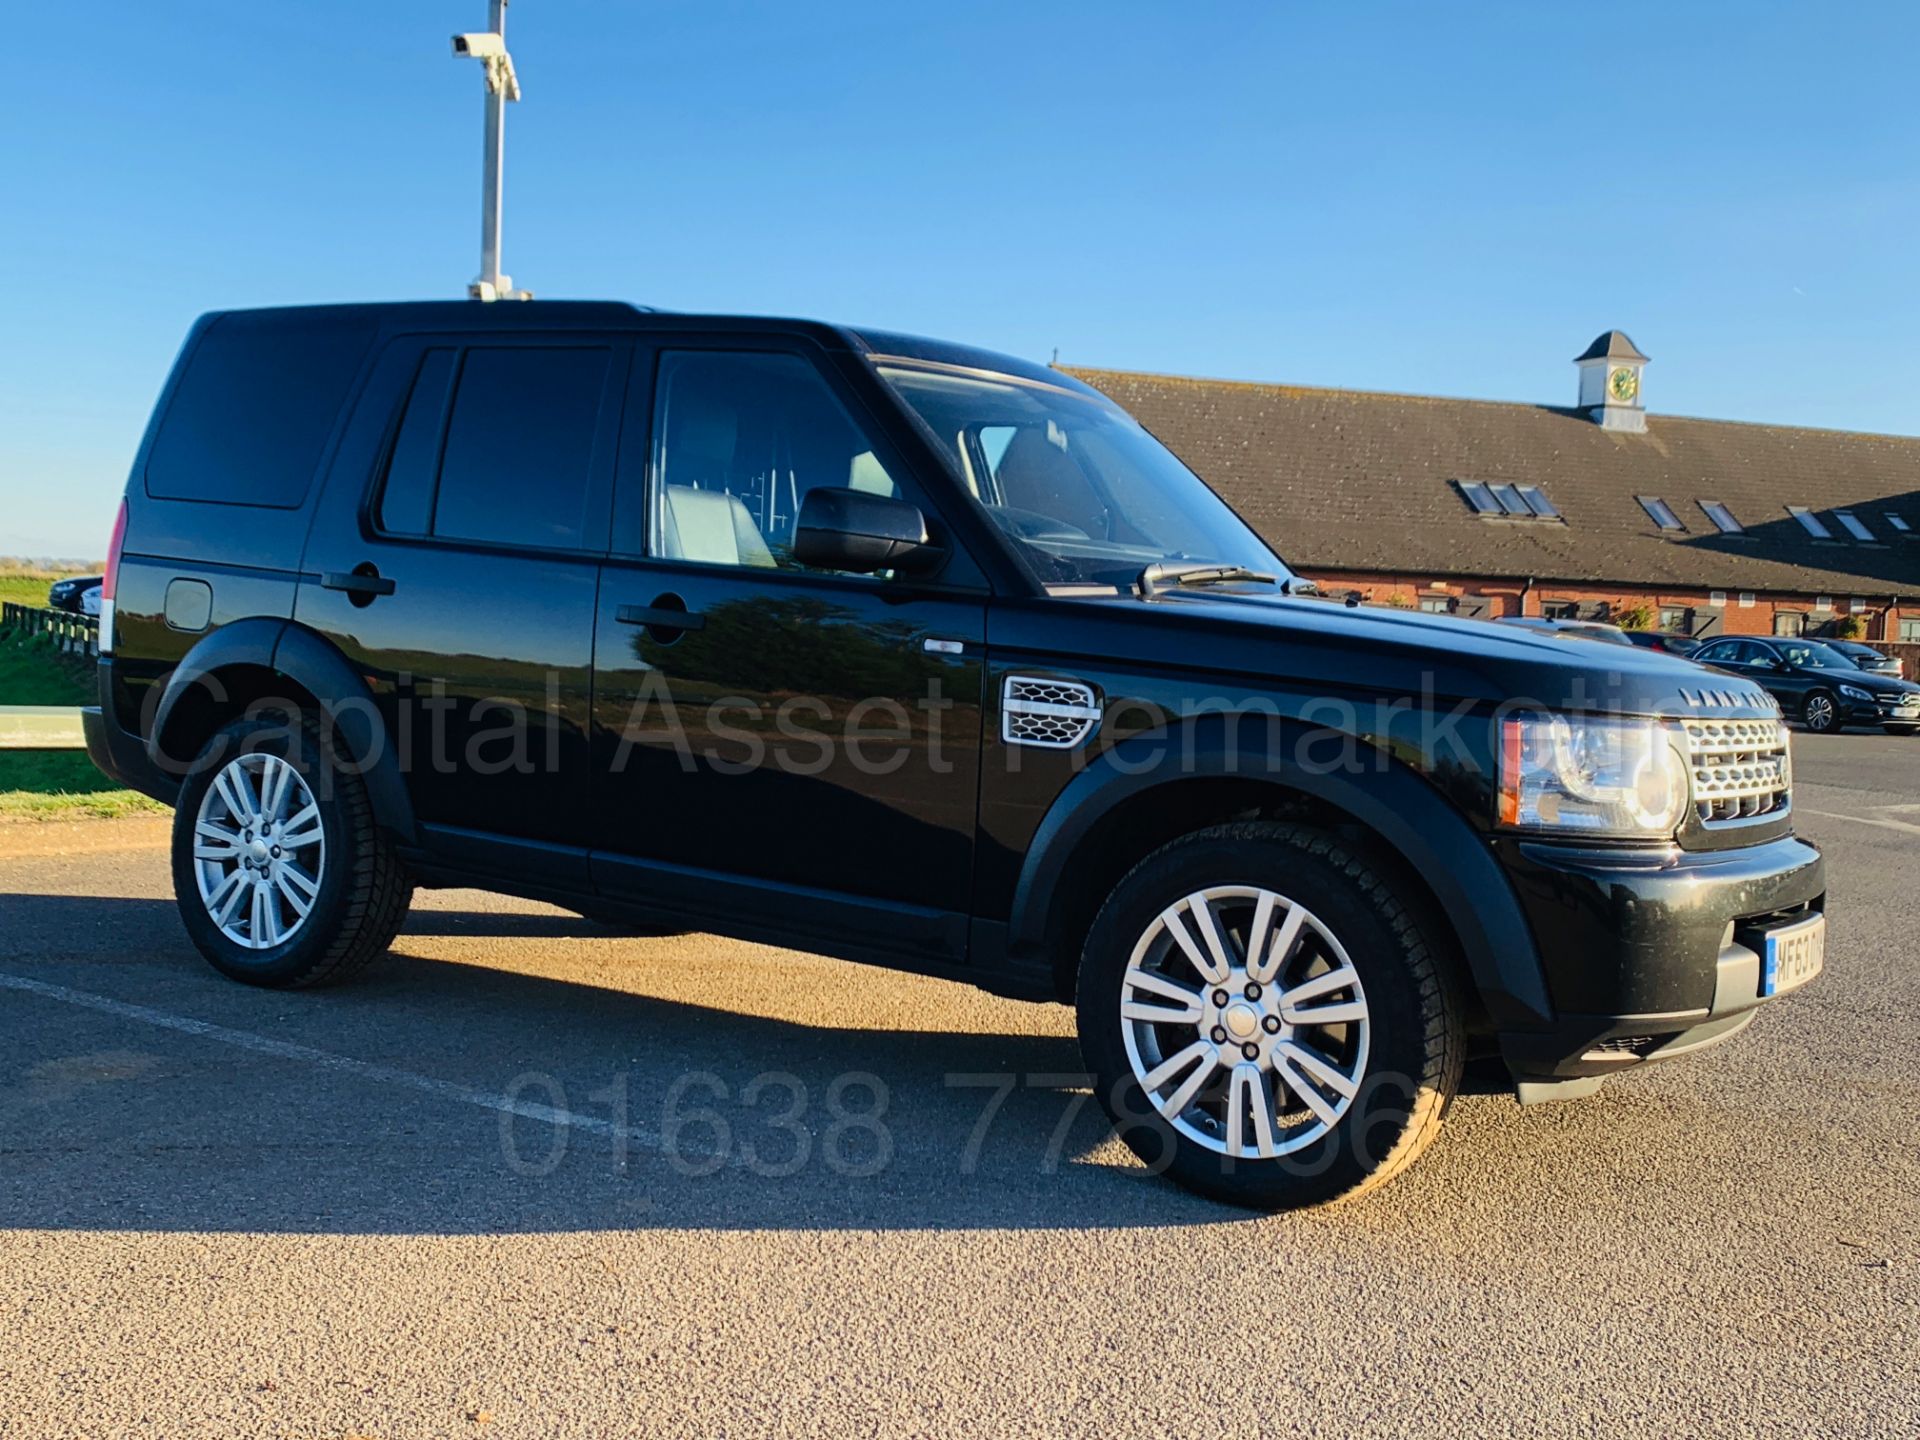 LAND ROVER DISCOVERY 4 **COMMERCIAL** (2014 MODEL) '3.0 SDV6 - 255 BHP - 8 SPEED AUTO' *HUGE SPEC* - Image 10 of 47